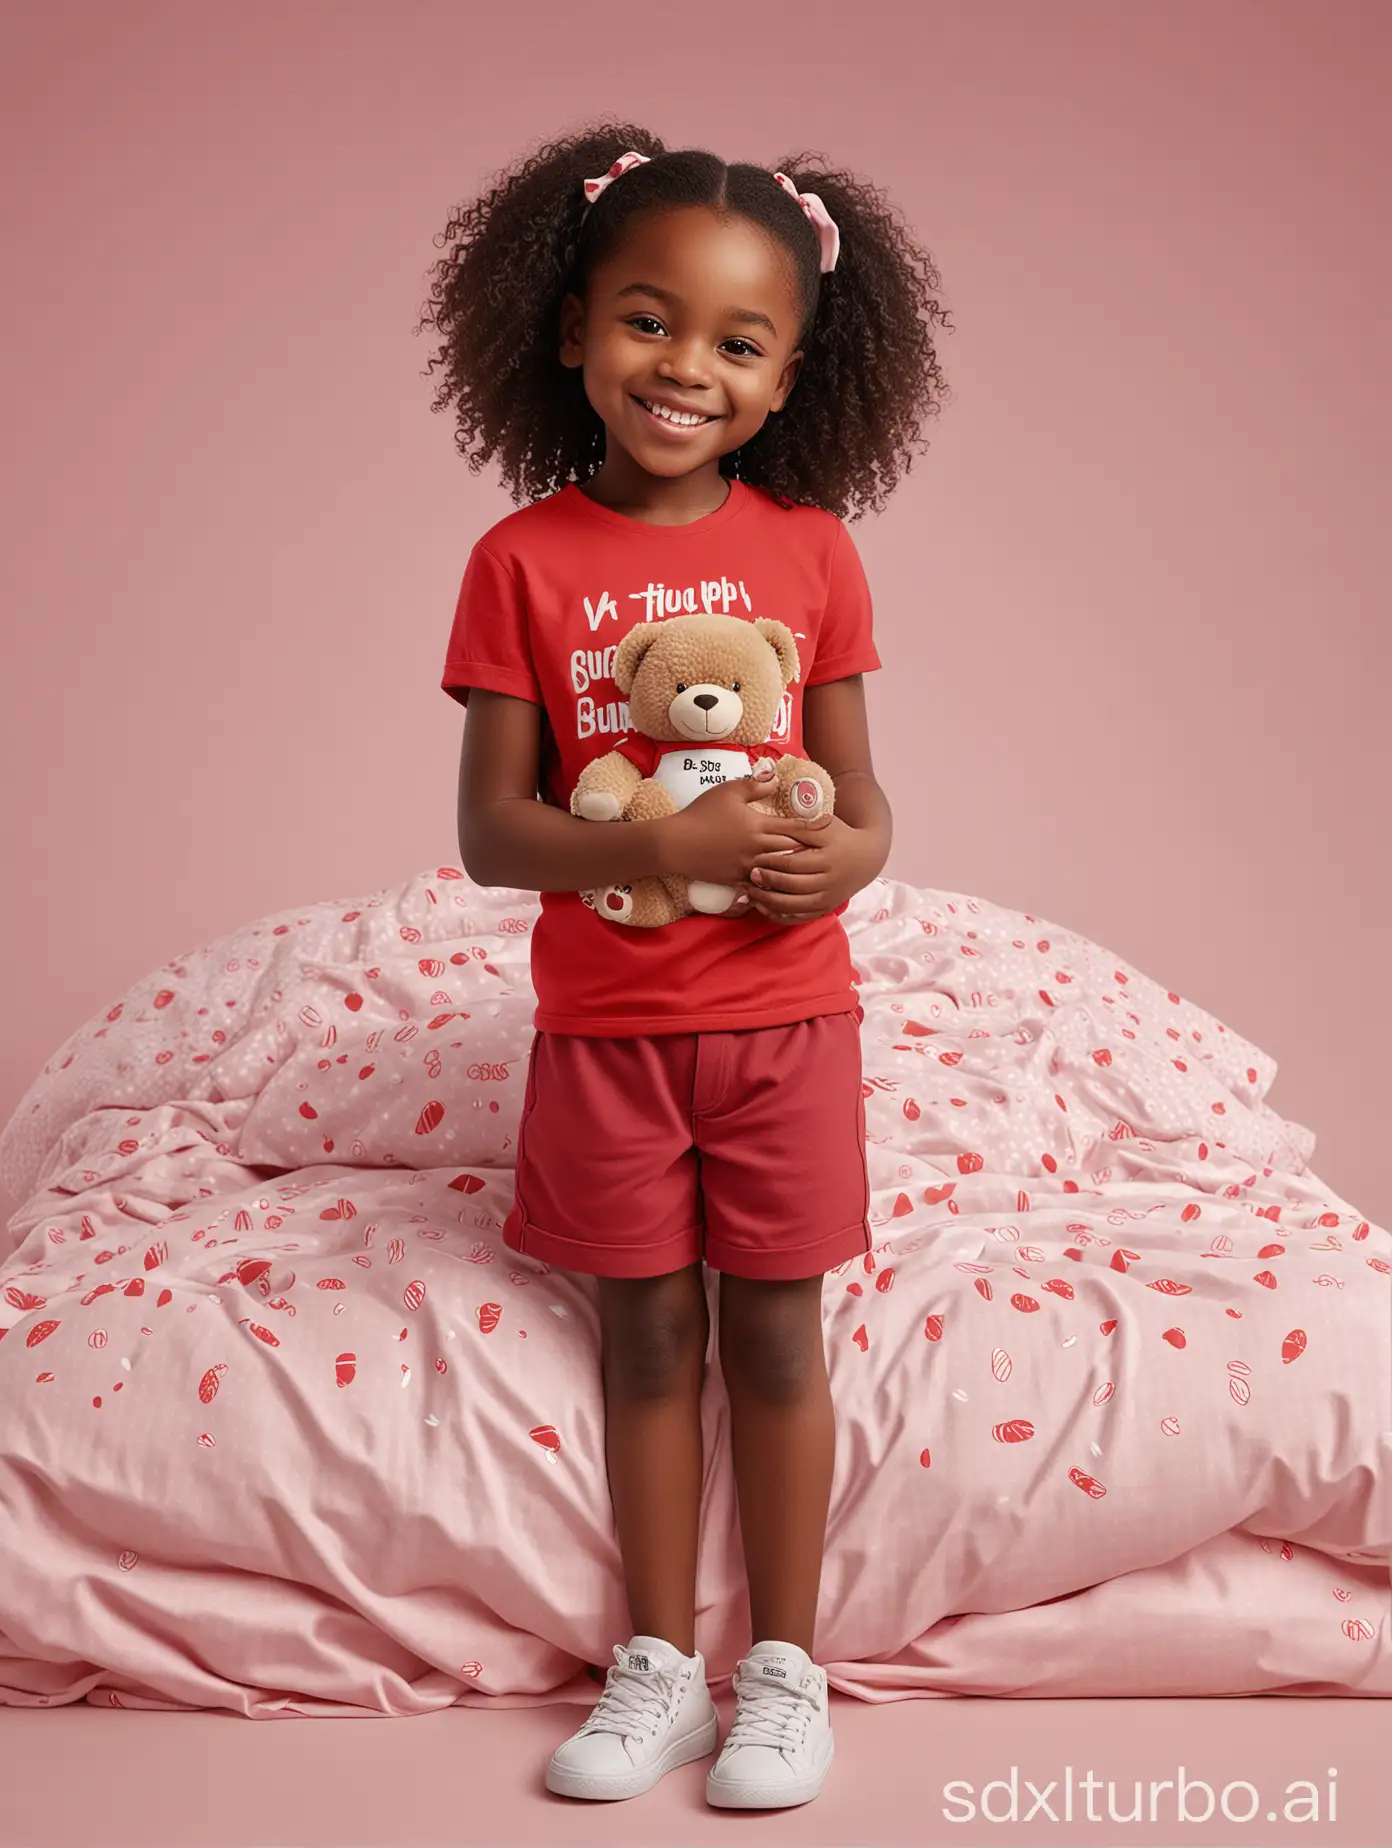 Adorable-African-Child-with-Biggie-Teddy-Bear-on-Soft-Cotton-Bed